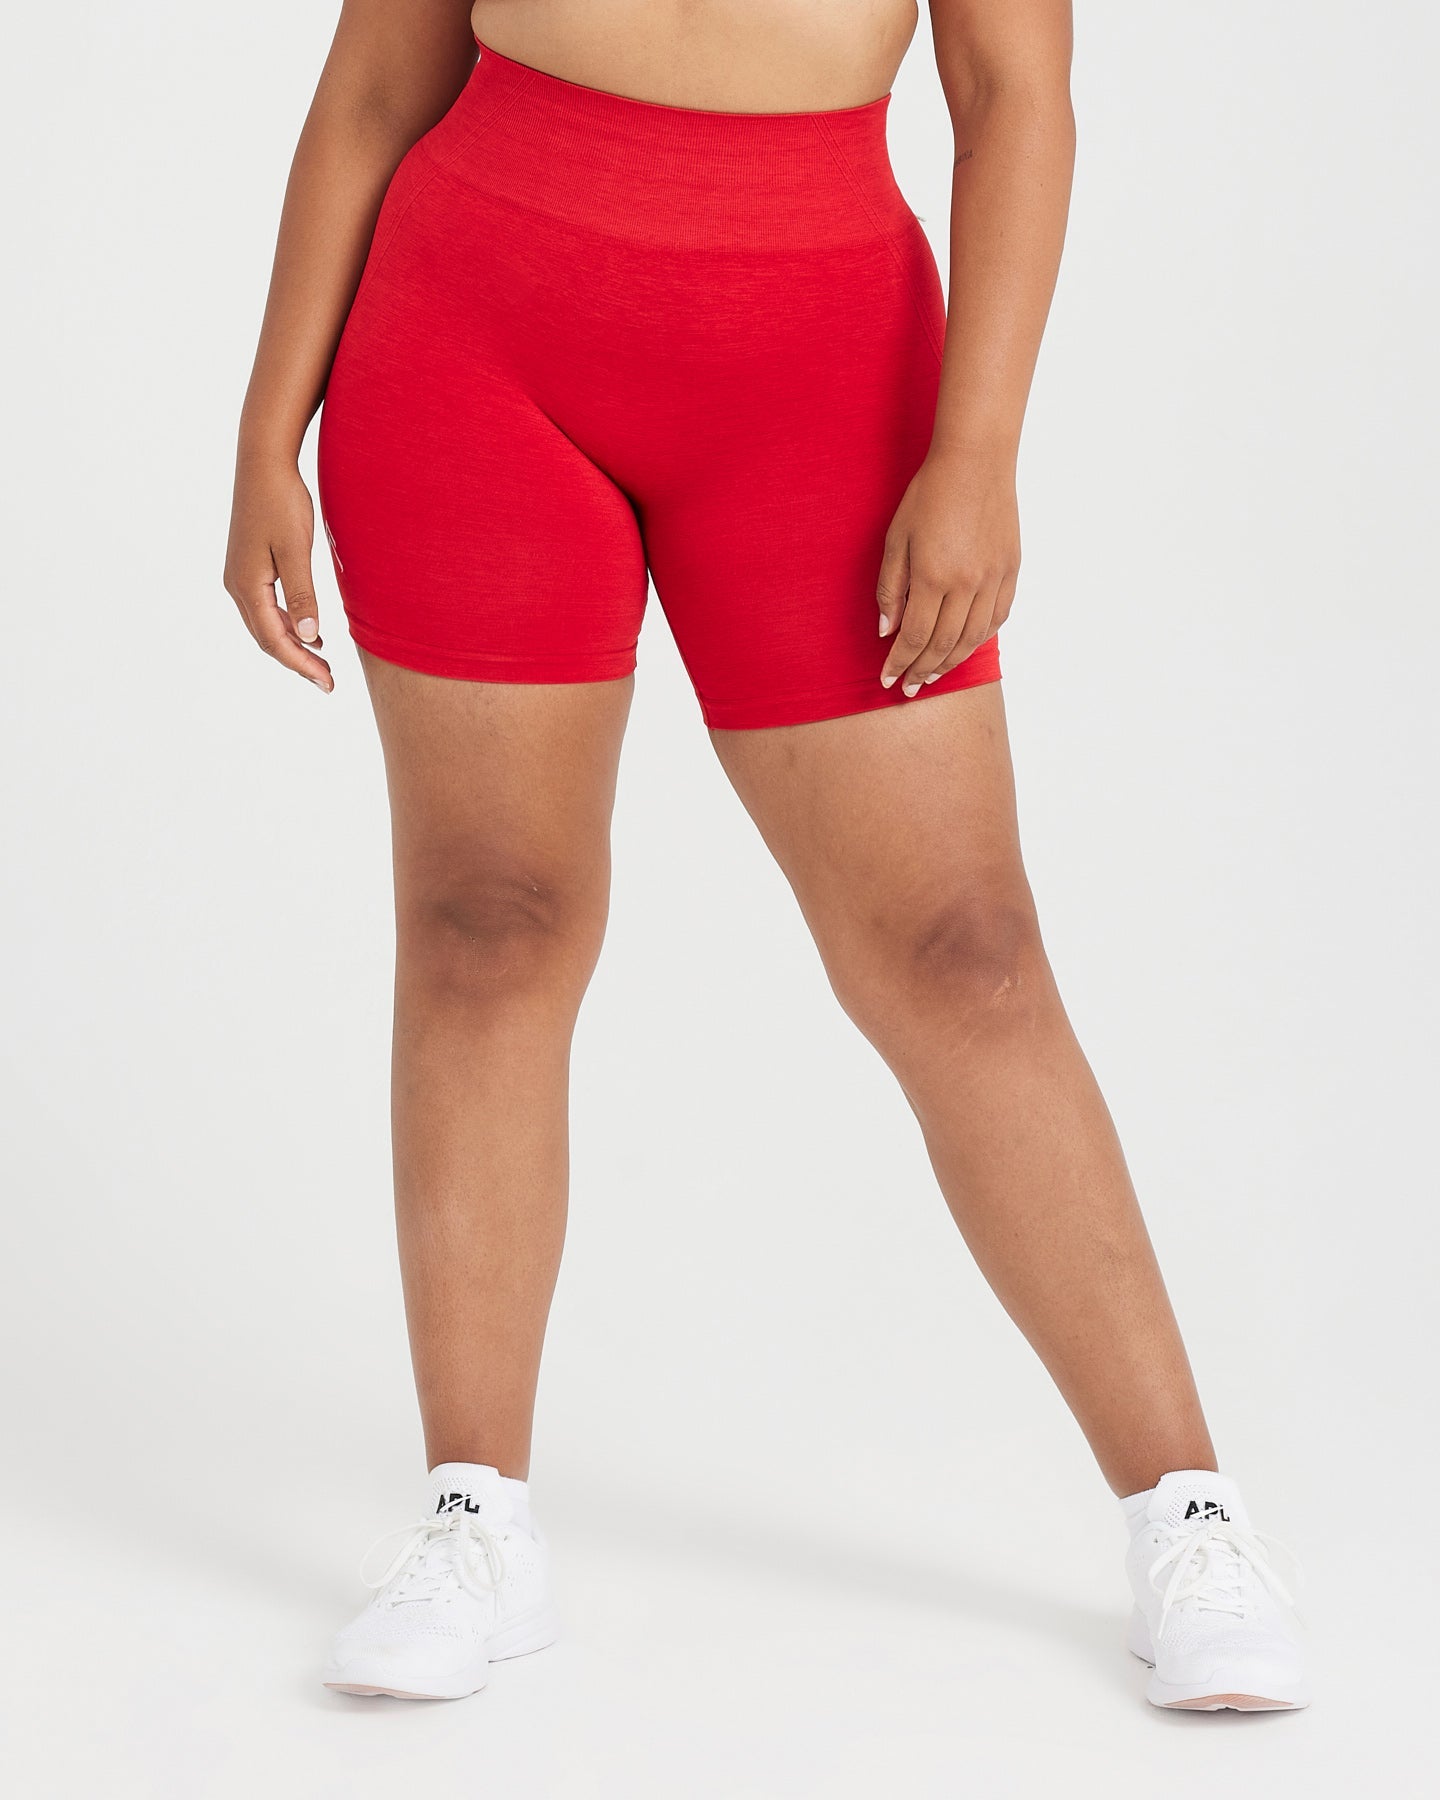 Cycling Shorts for Women - Spicy Red | Oner Active EU